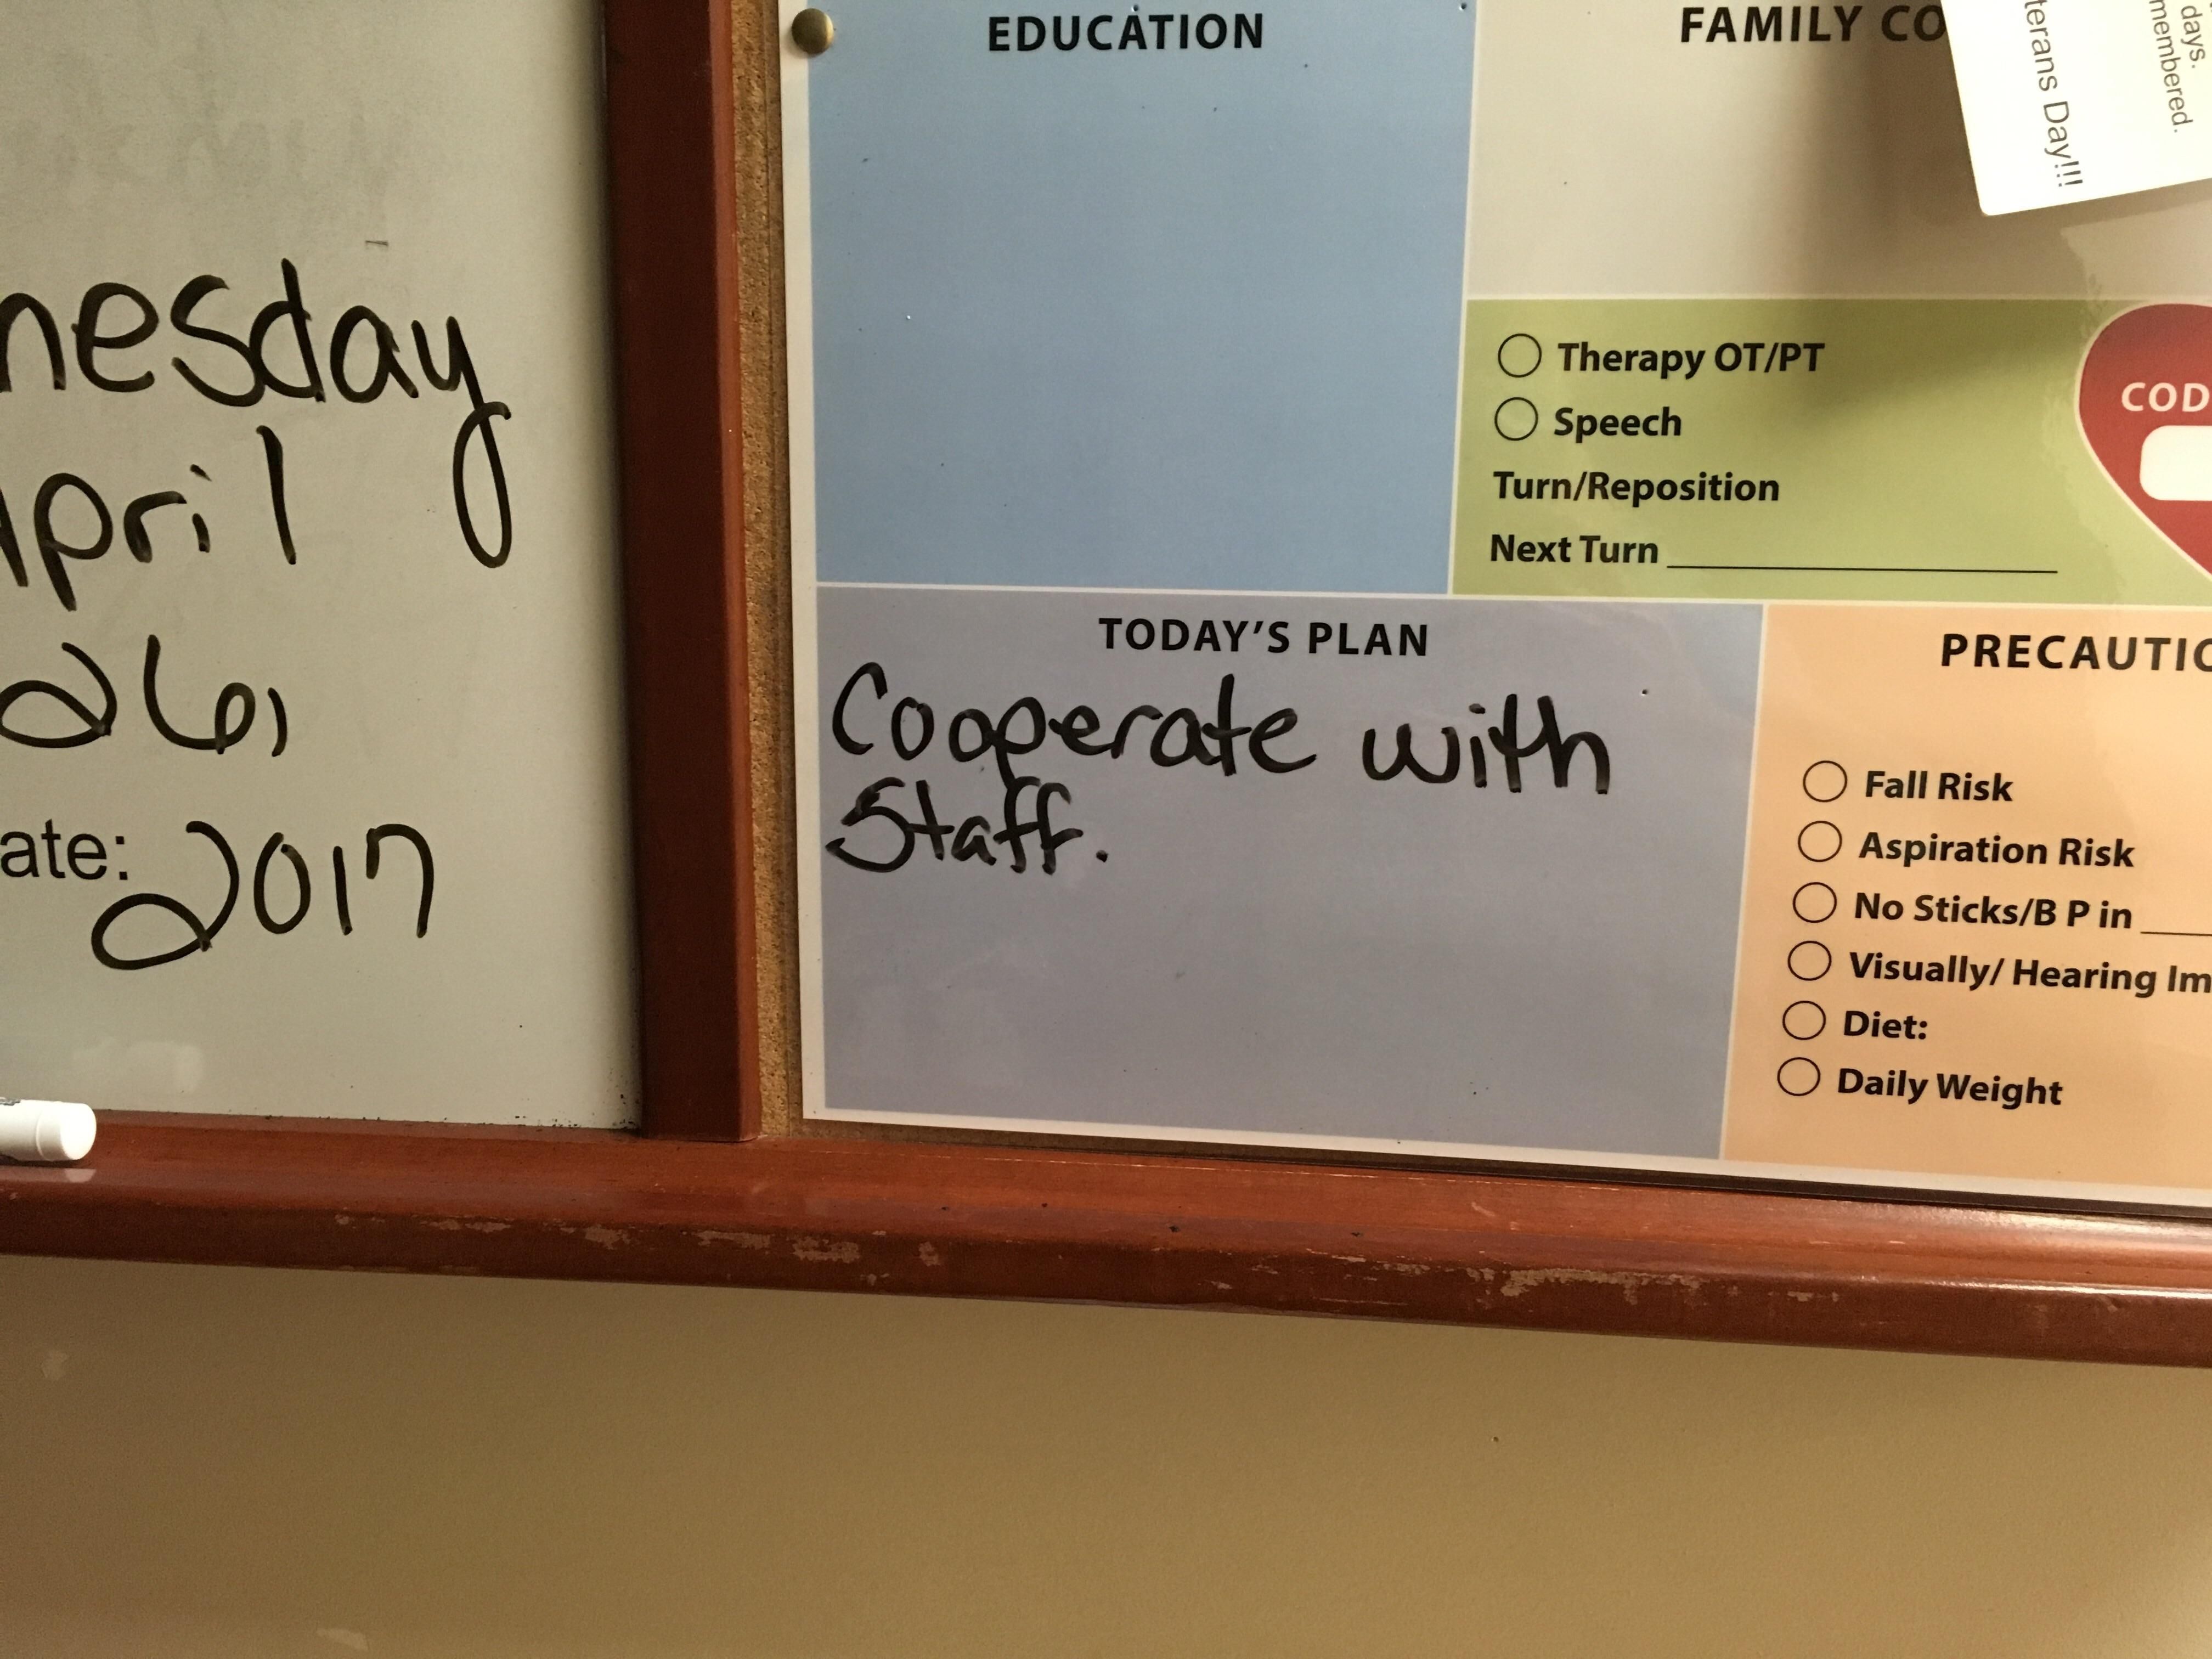 Visited my uncle in the hospital last night, and the white board showed this as "Today's Plan". Sounds about right.